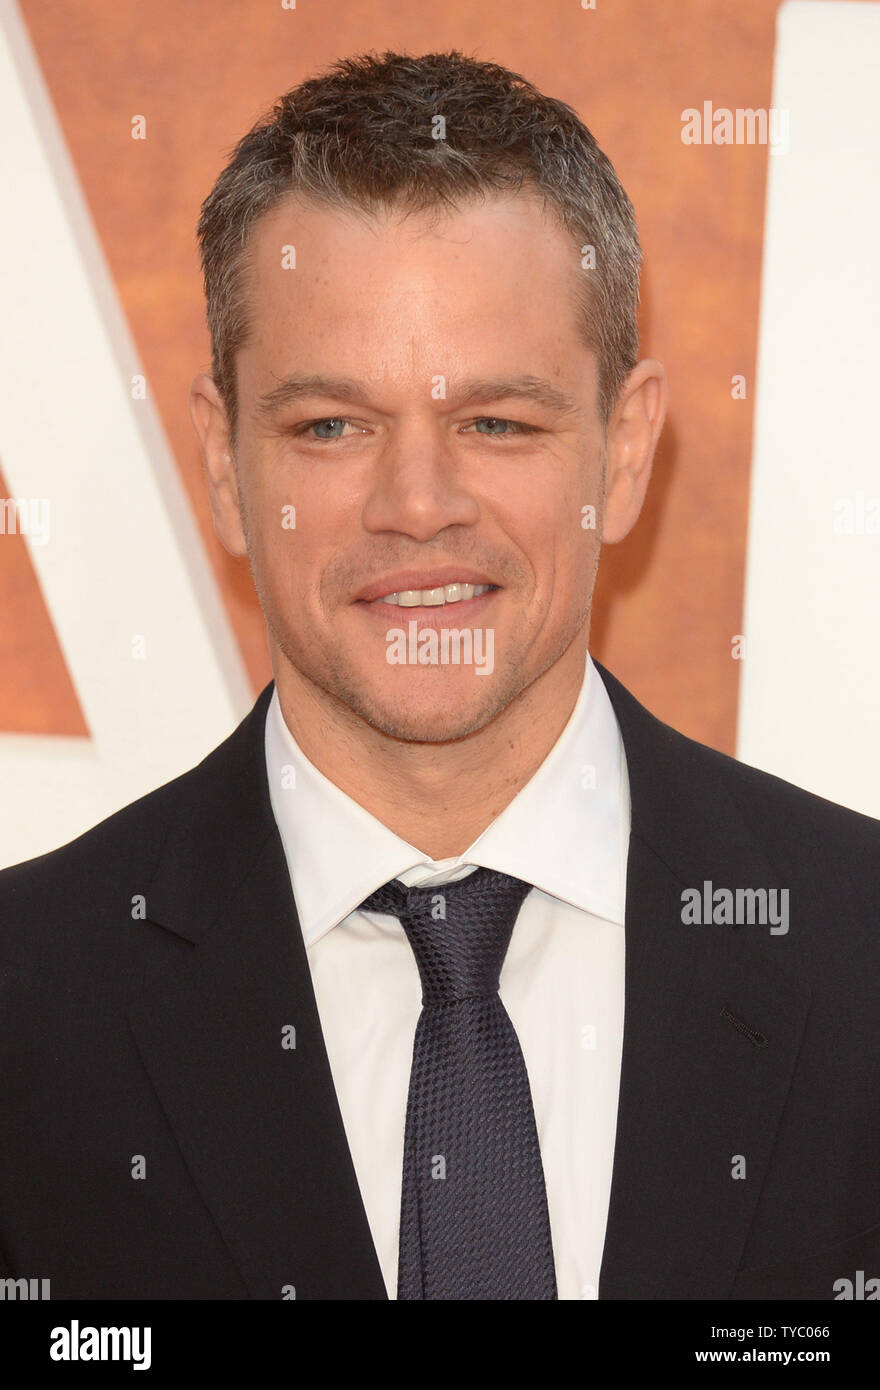 American actor Matt Damon attends the premiere of "The Martian" at Odeon in London on September 24, 2015. Photo by Rune Hellestad/ UPI Stock Photo